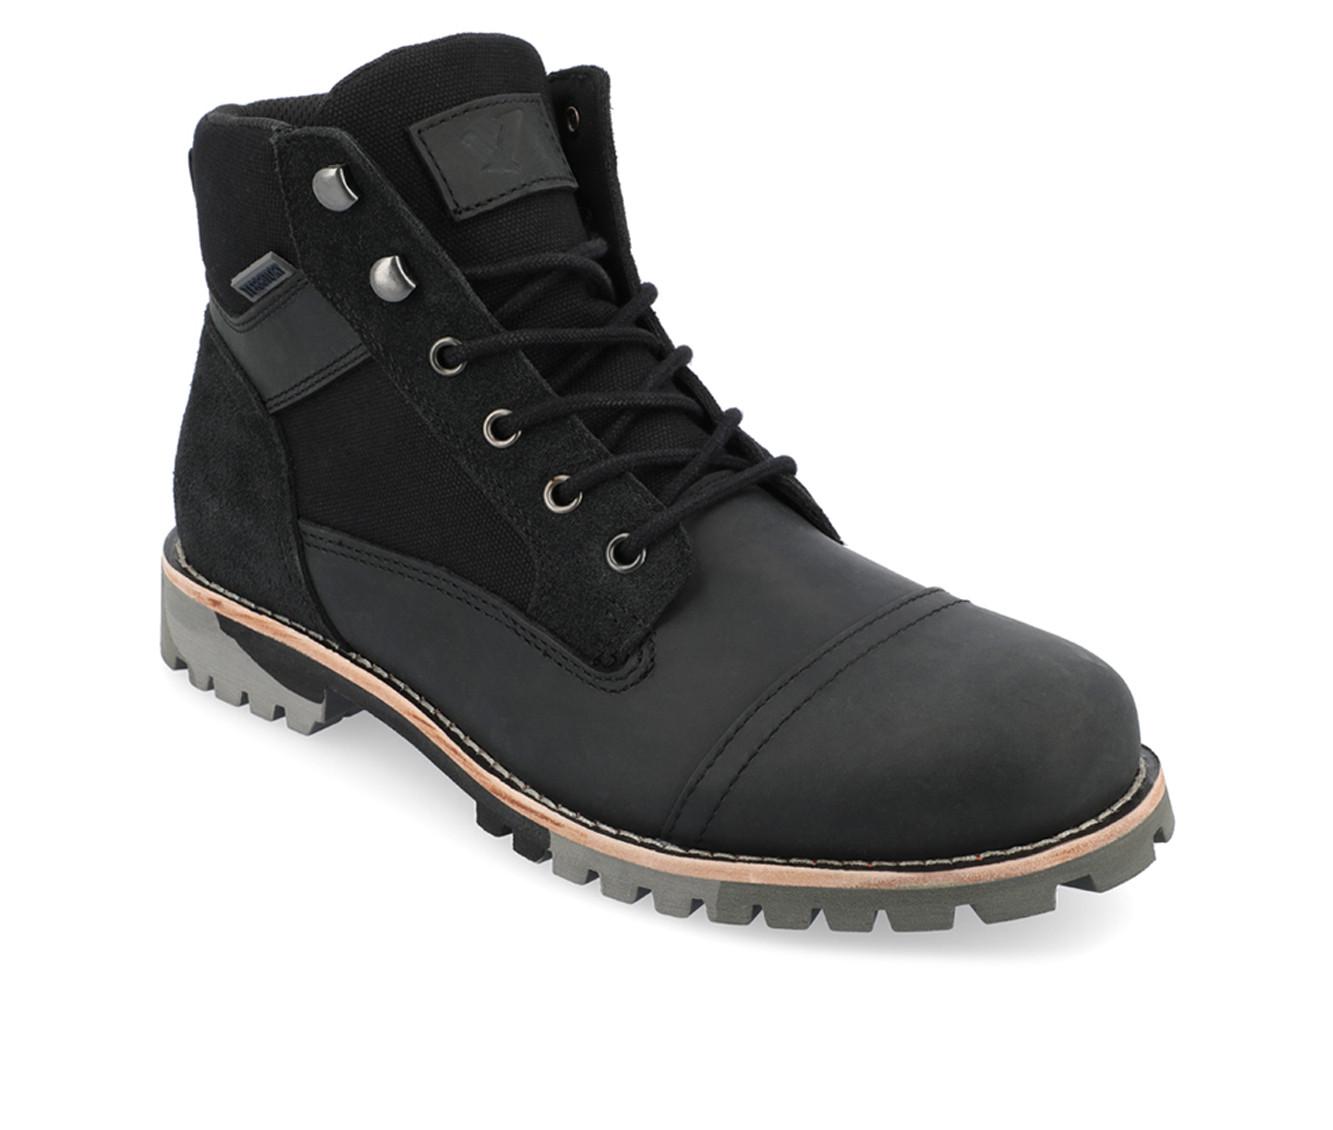 Territory Brute Lace Up Boots